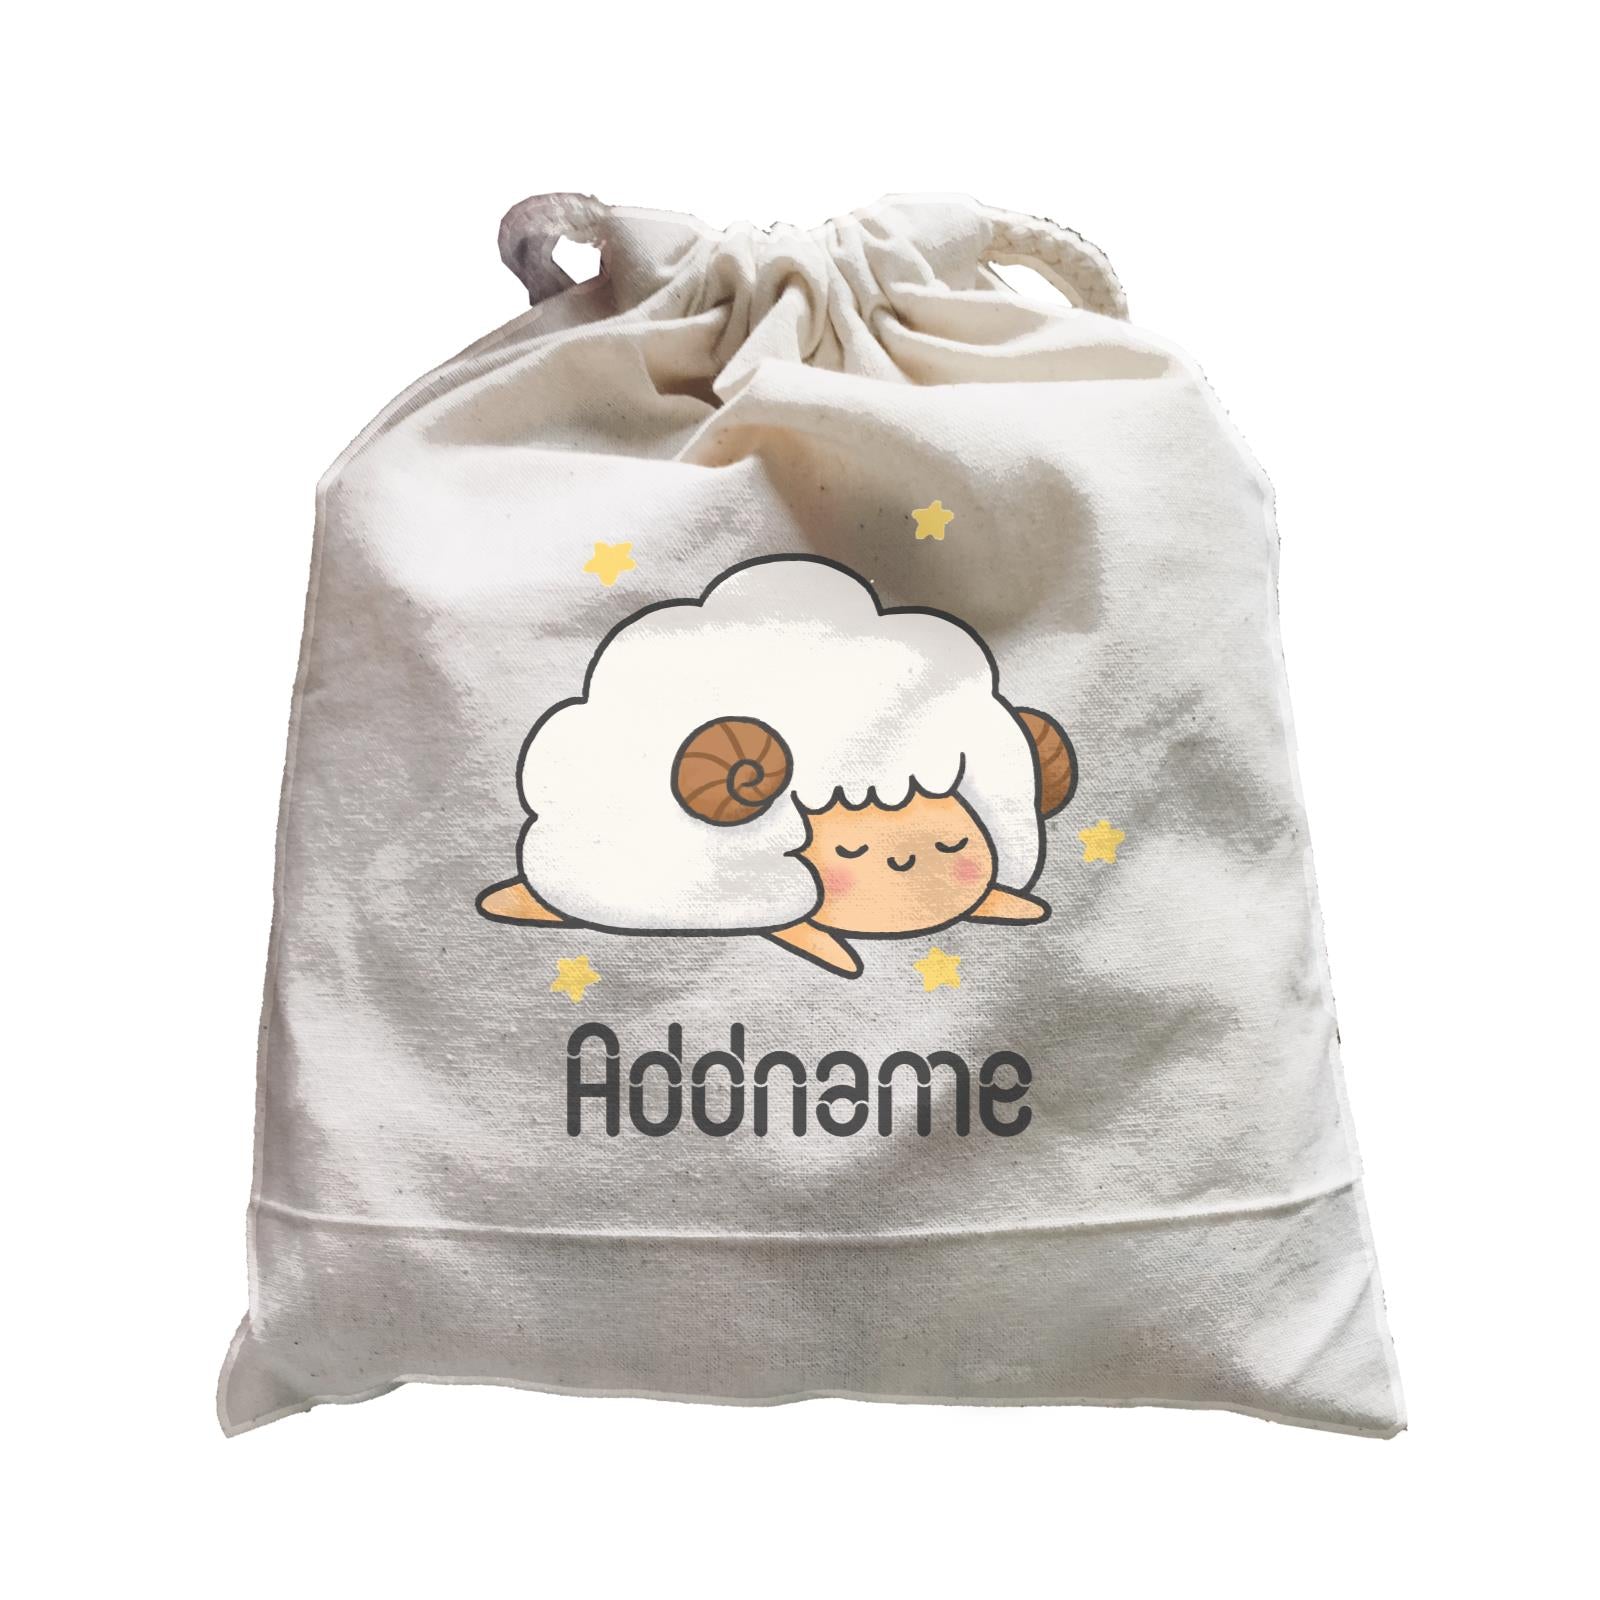 Cute Hand Drawn Style Sheep Addname Satchel